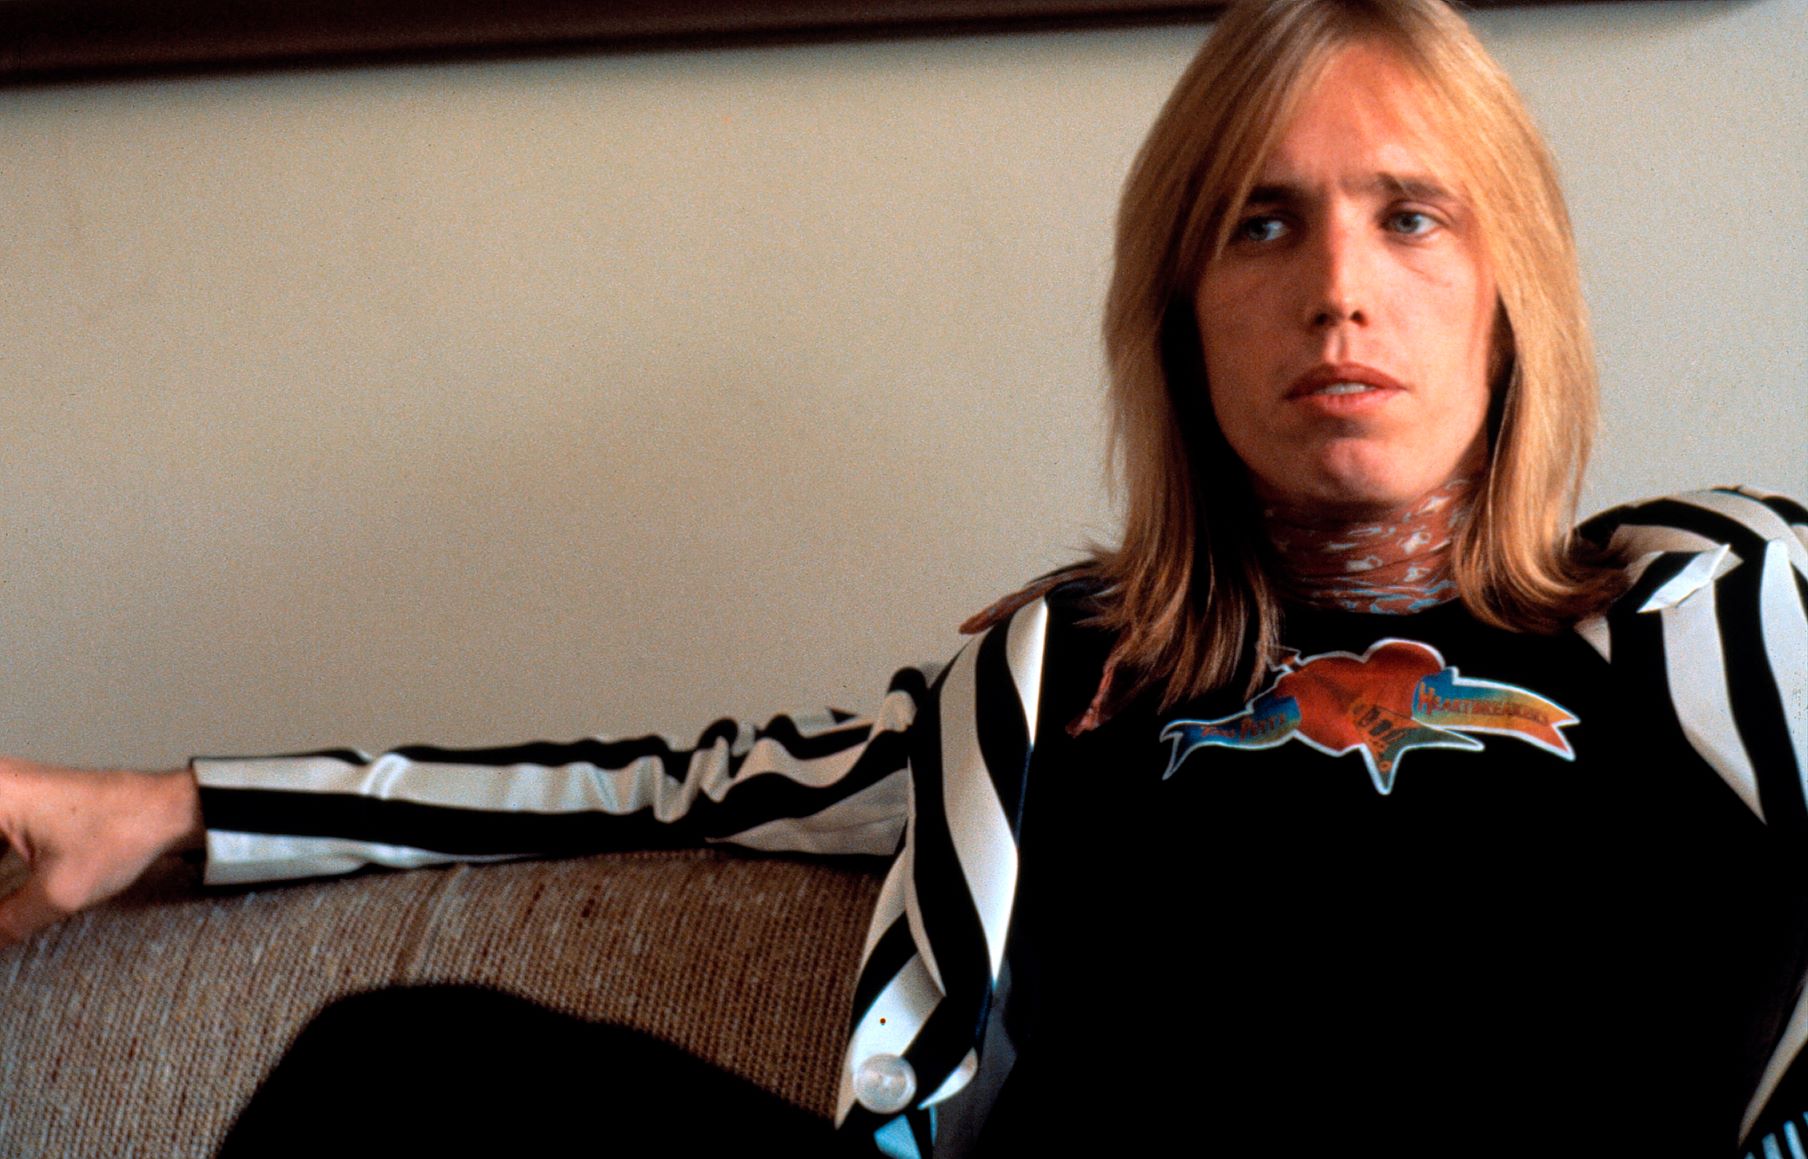 Tom Petty wears a black and white jacket and sits on a couch.